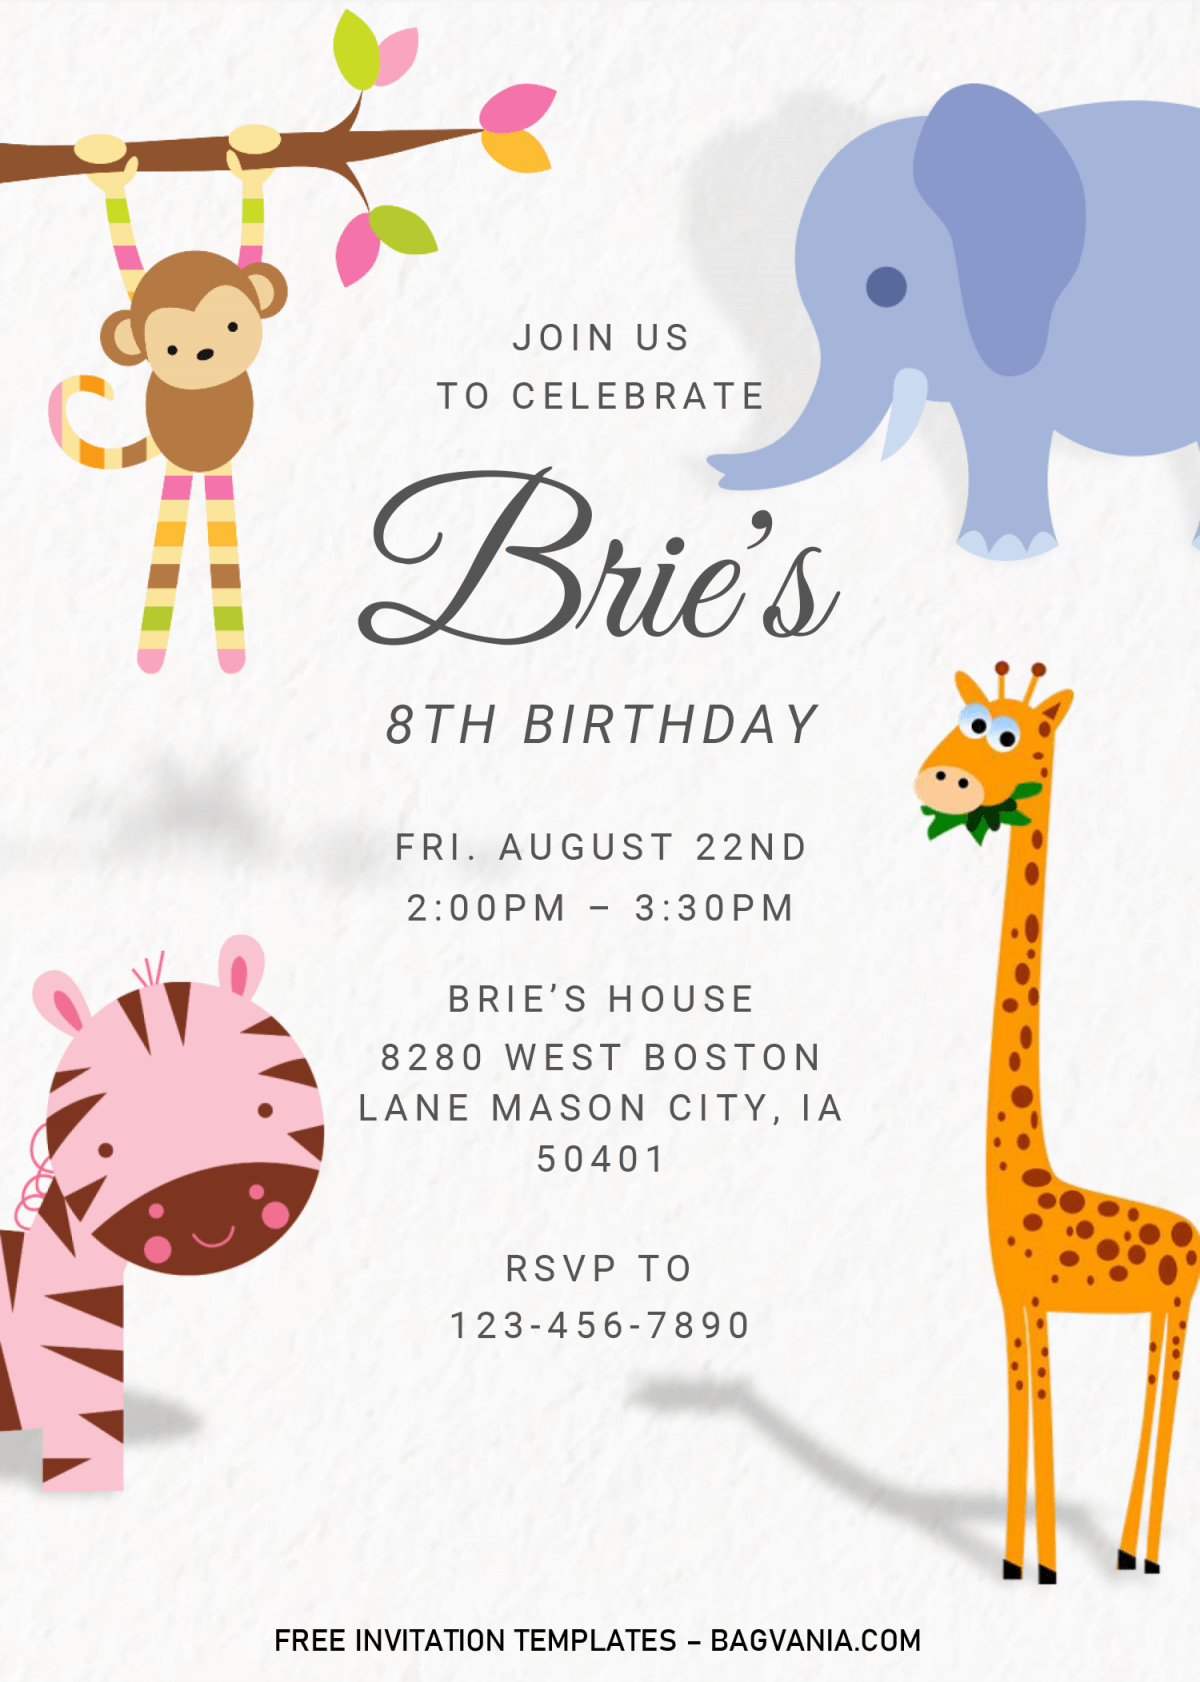 Safari Baby Invitation Templates - Editable With MS Word and has pink zebra and blue elephant